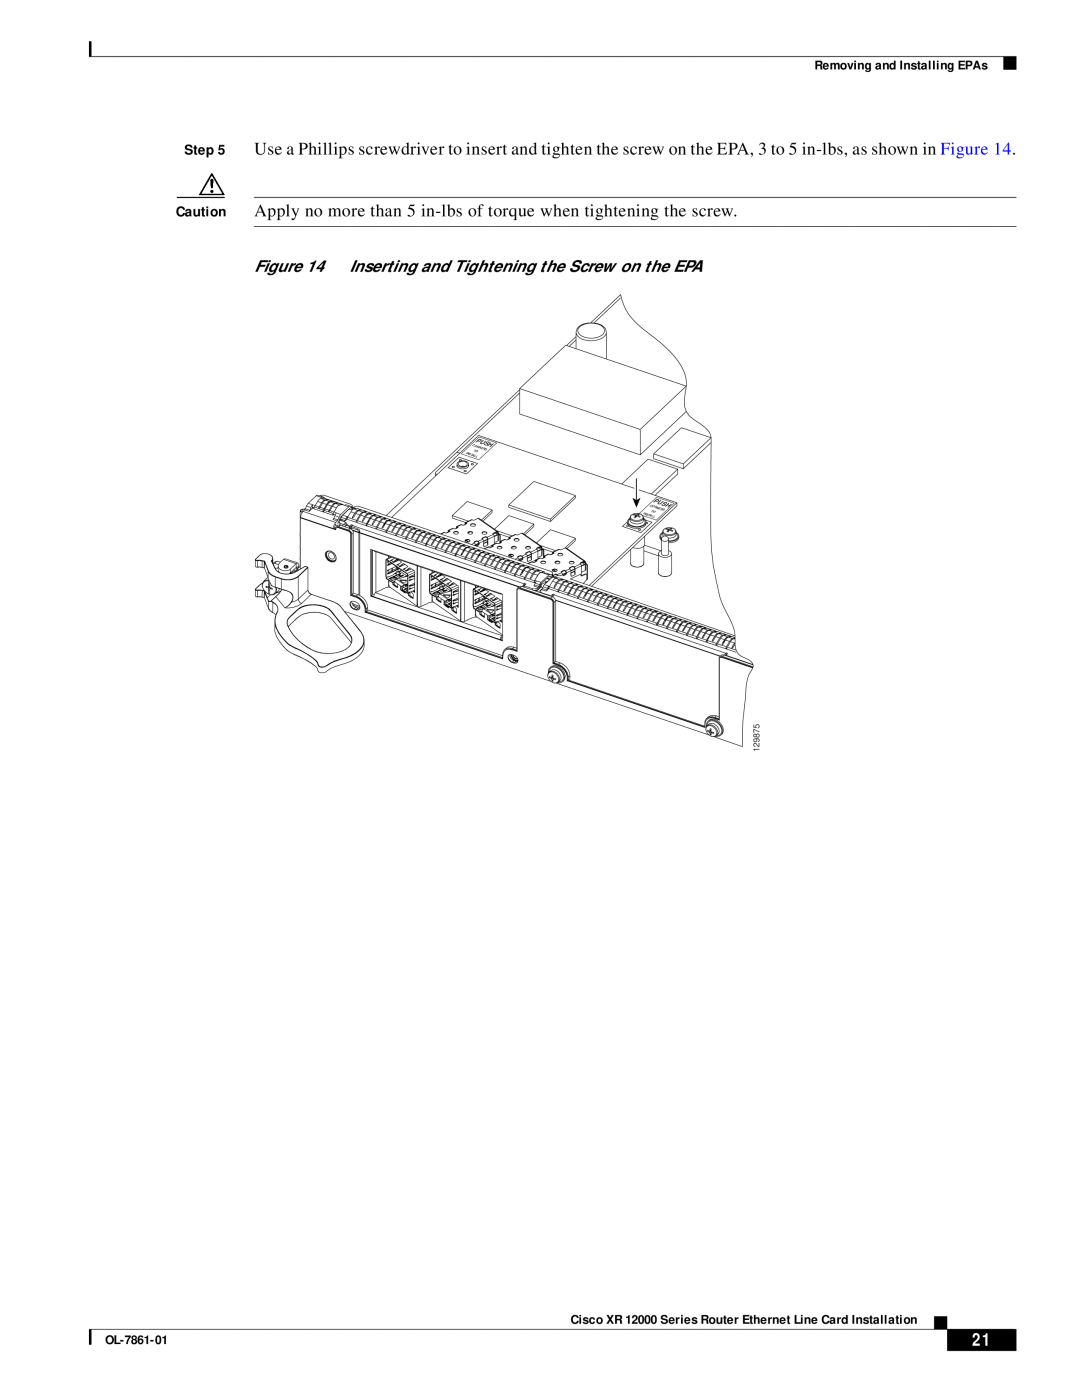 Cisco Systems OL-7861-01 manual Inserting and Tightening the Screw on the EPA 